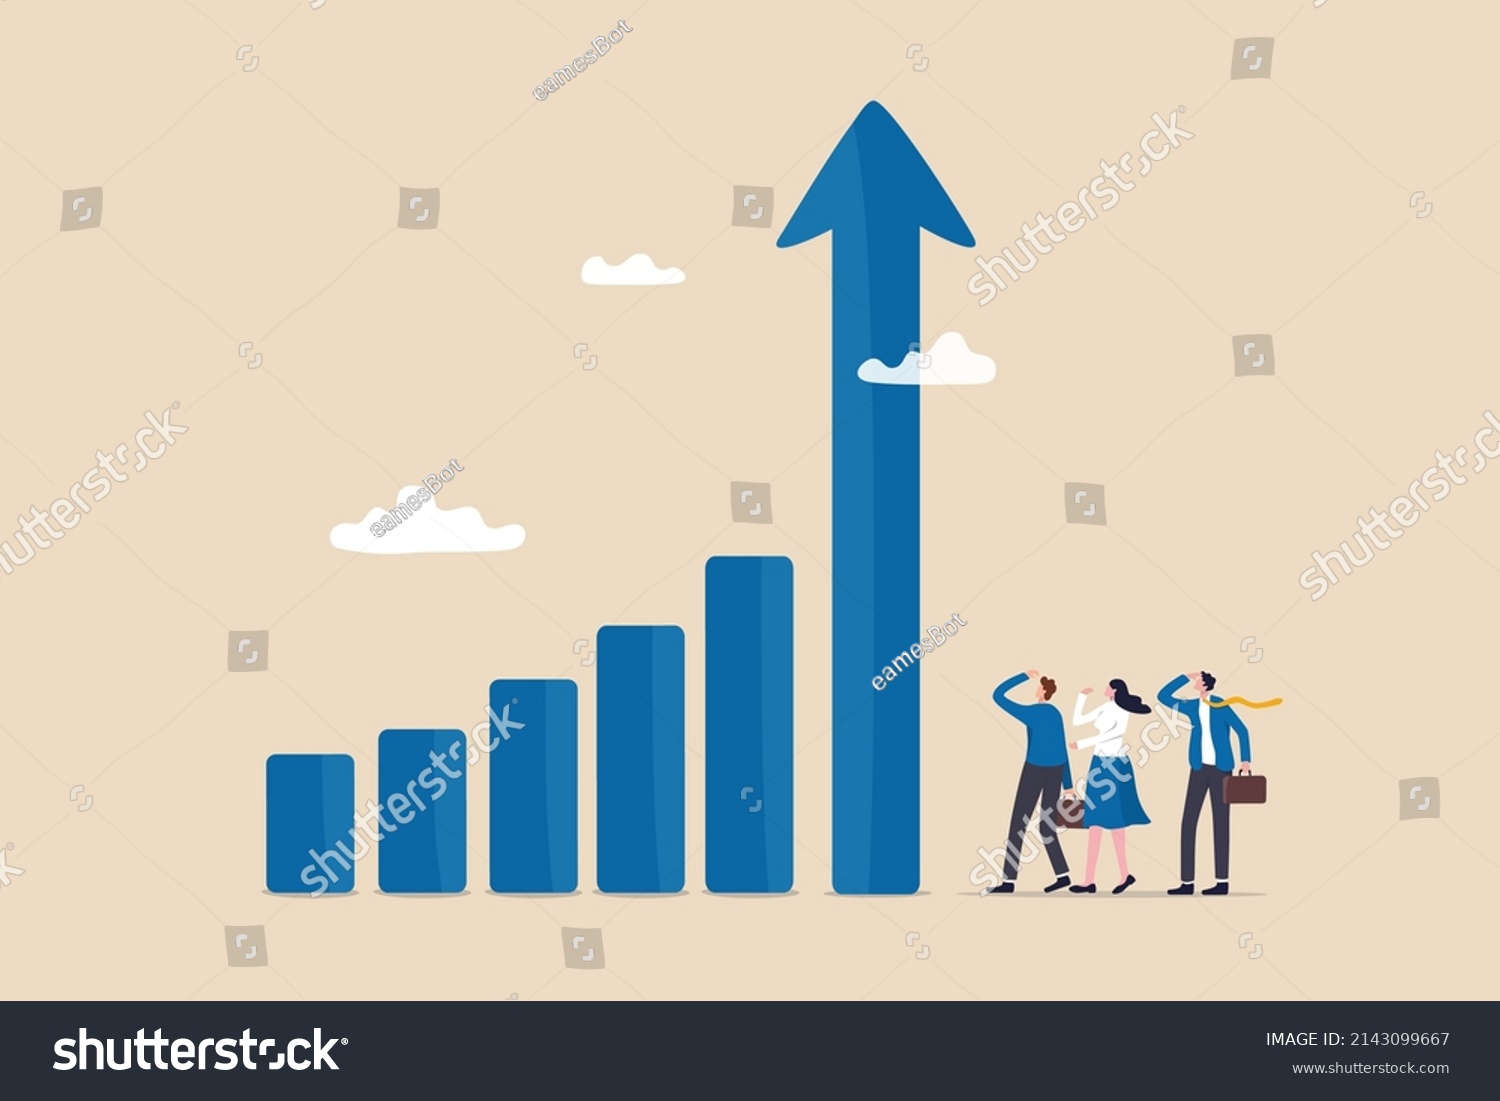 Grow business increase sales and profit, growth or progress to achieve goal and target, improve or development to boost performance concept, business people team looking at high rising up graph arrow. #2143099667